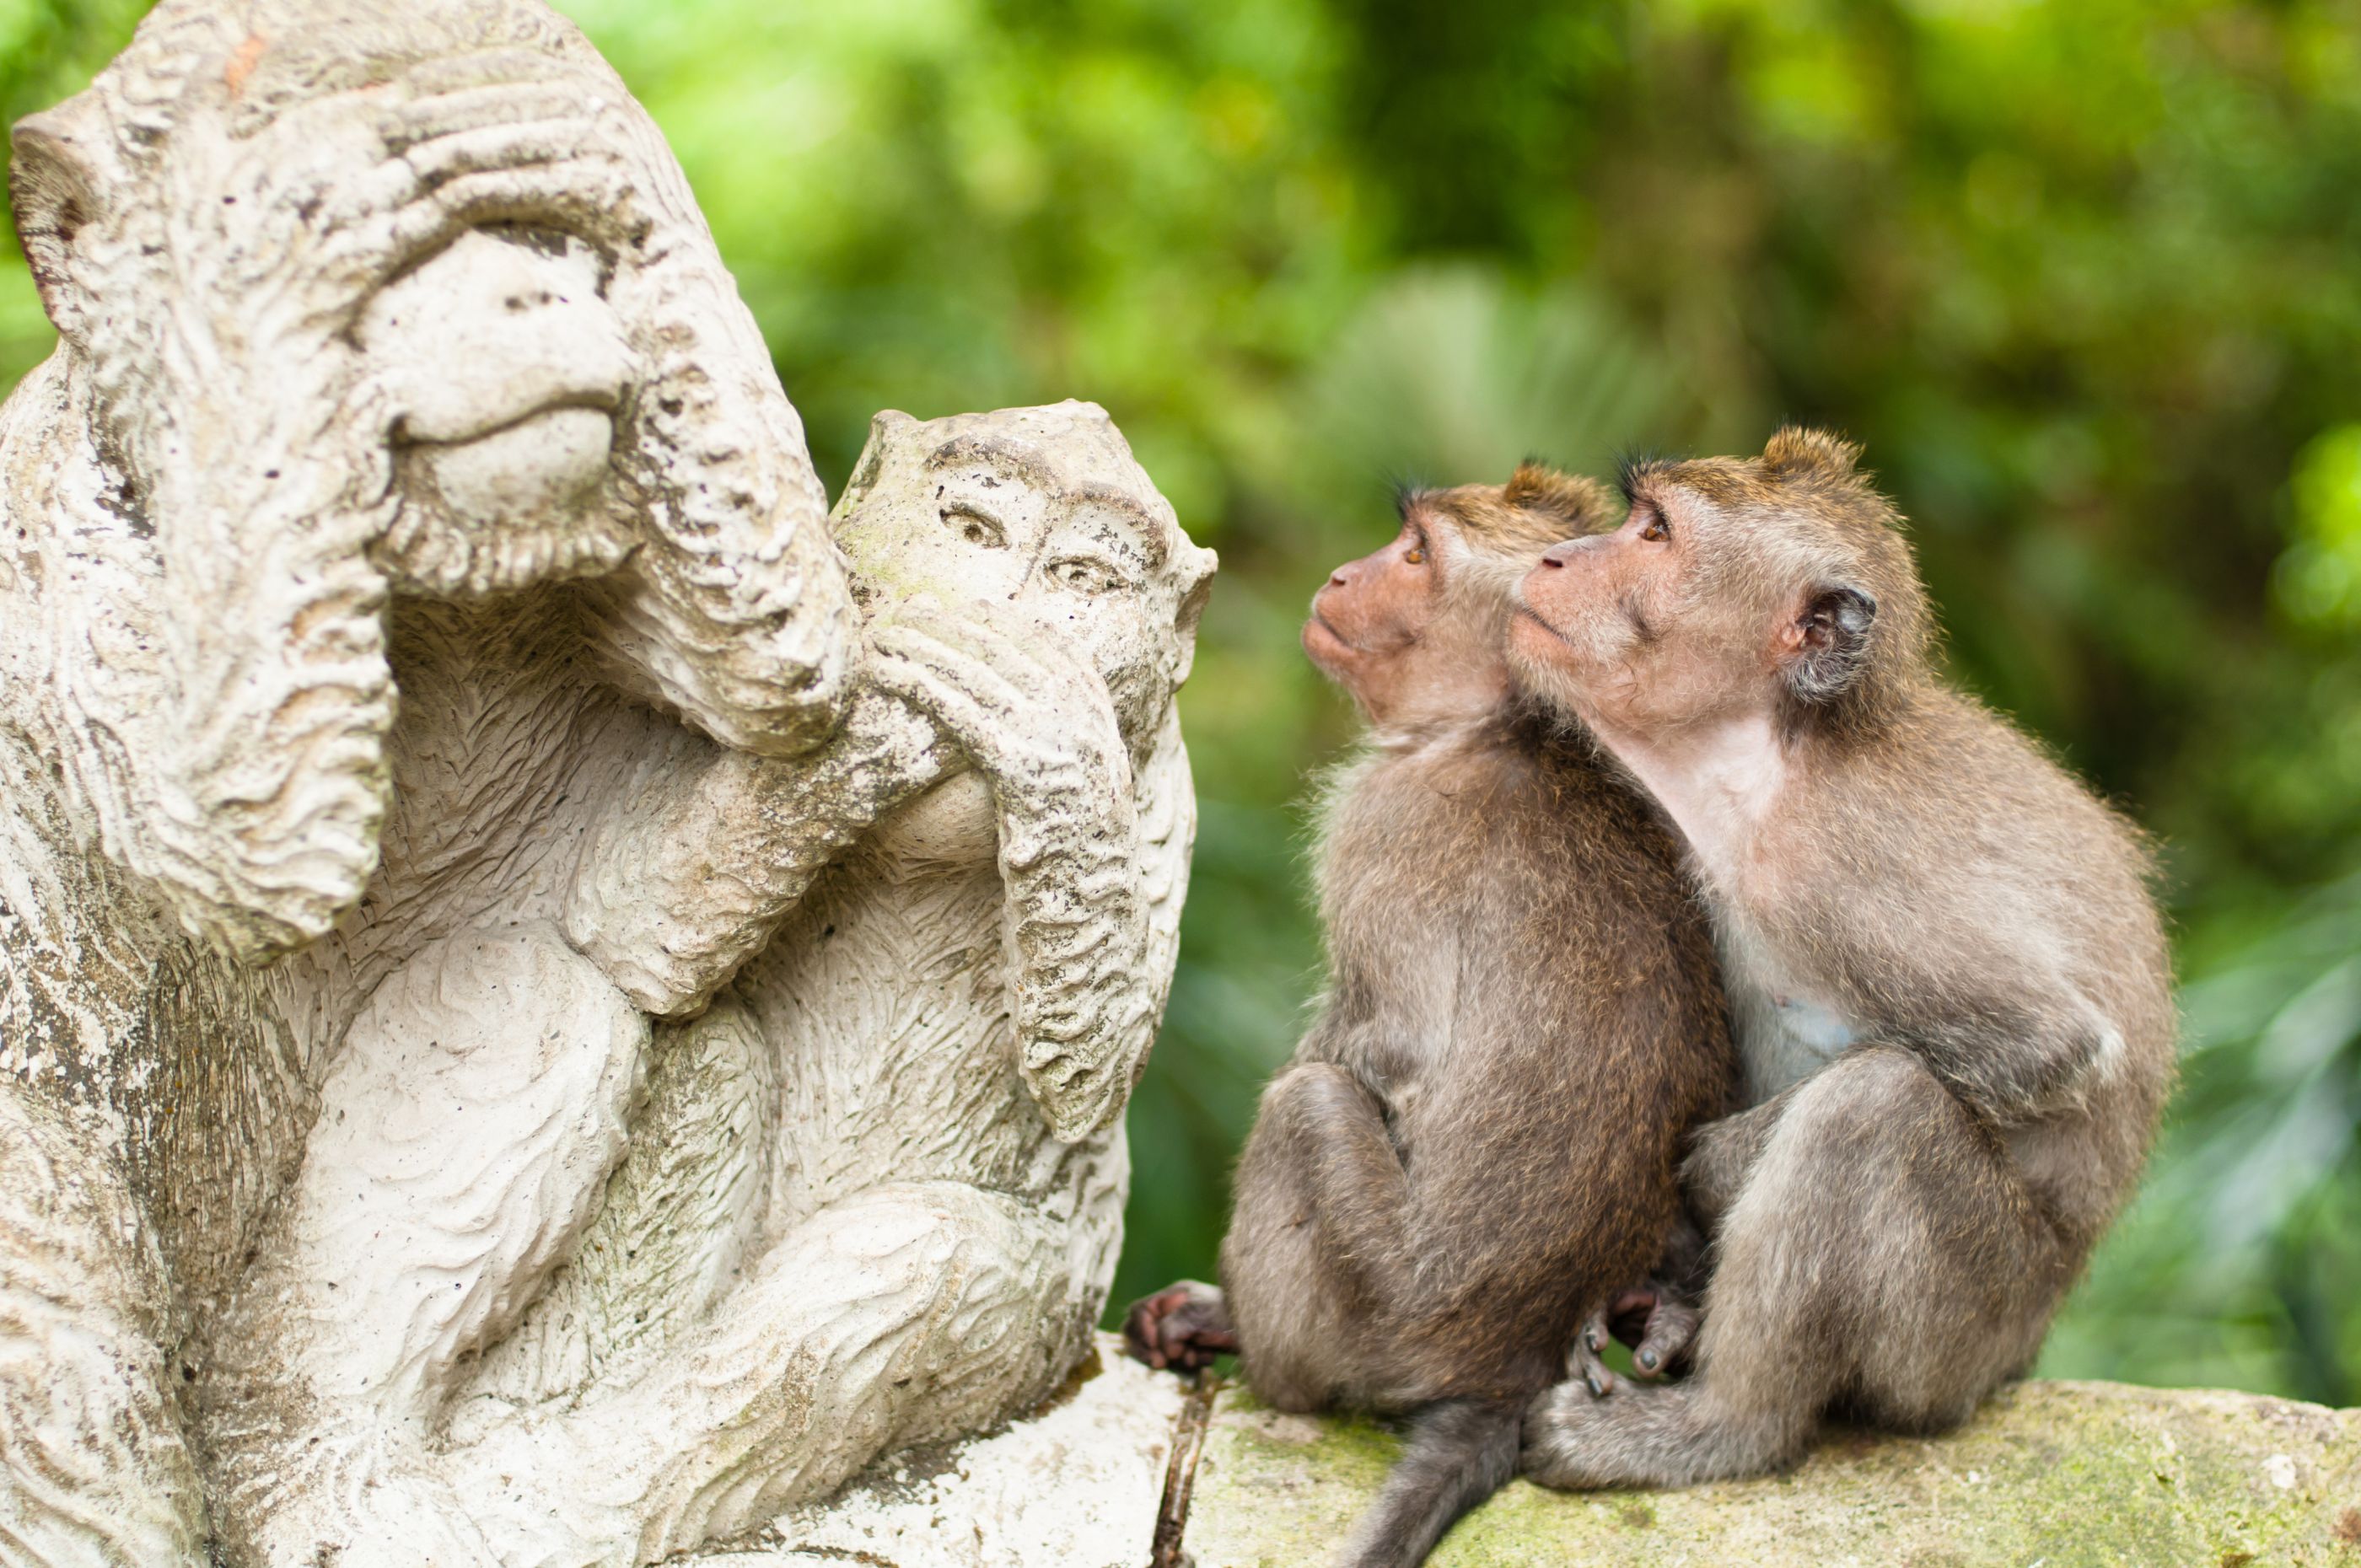 Macaques sacred monkey forest seen in Ubud Bali, Indonesia